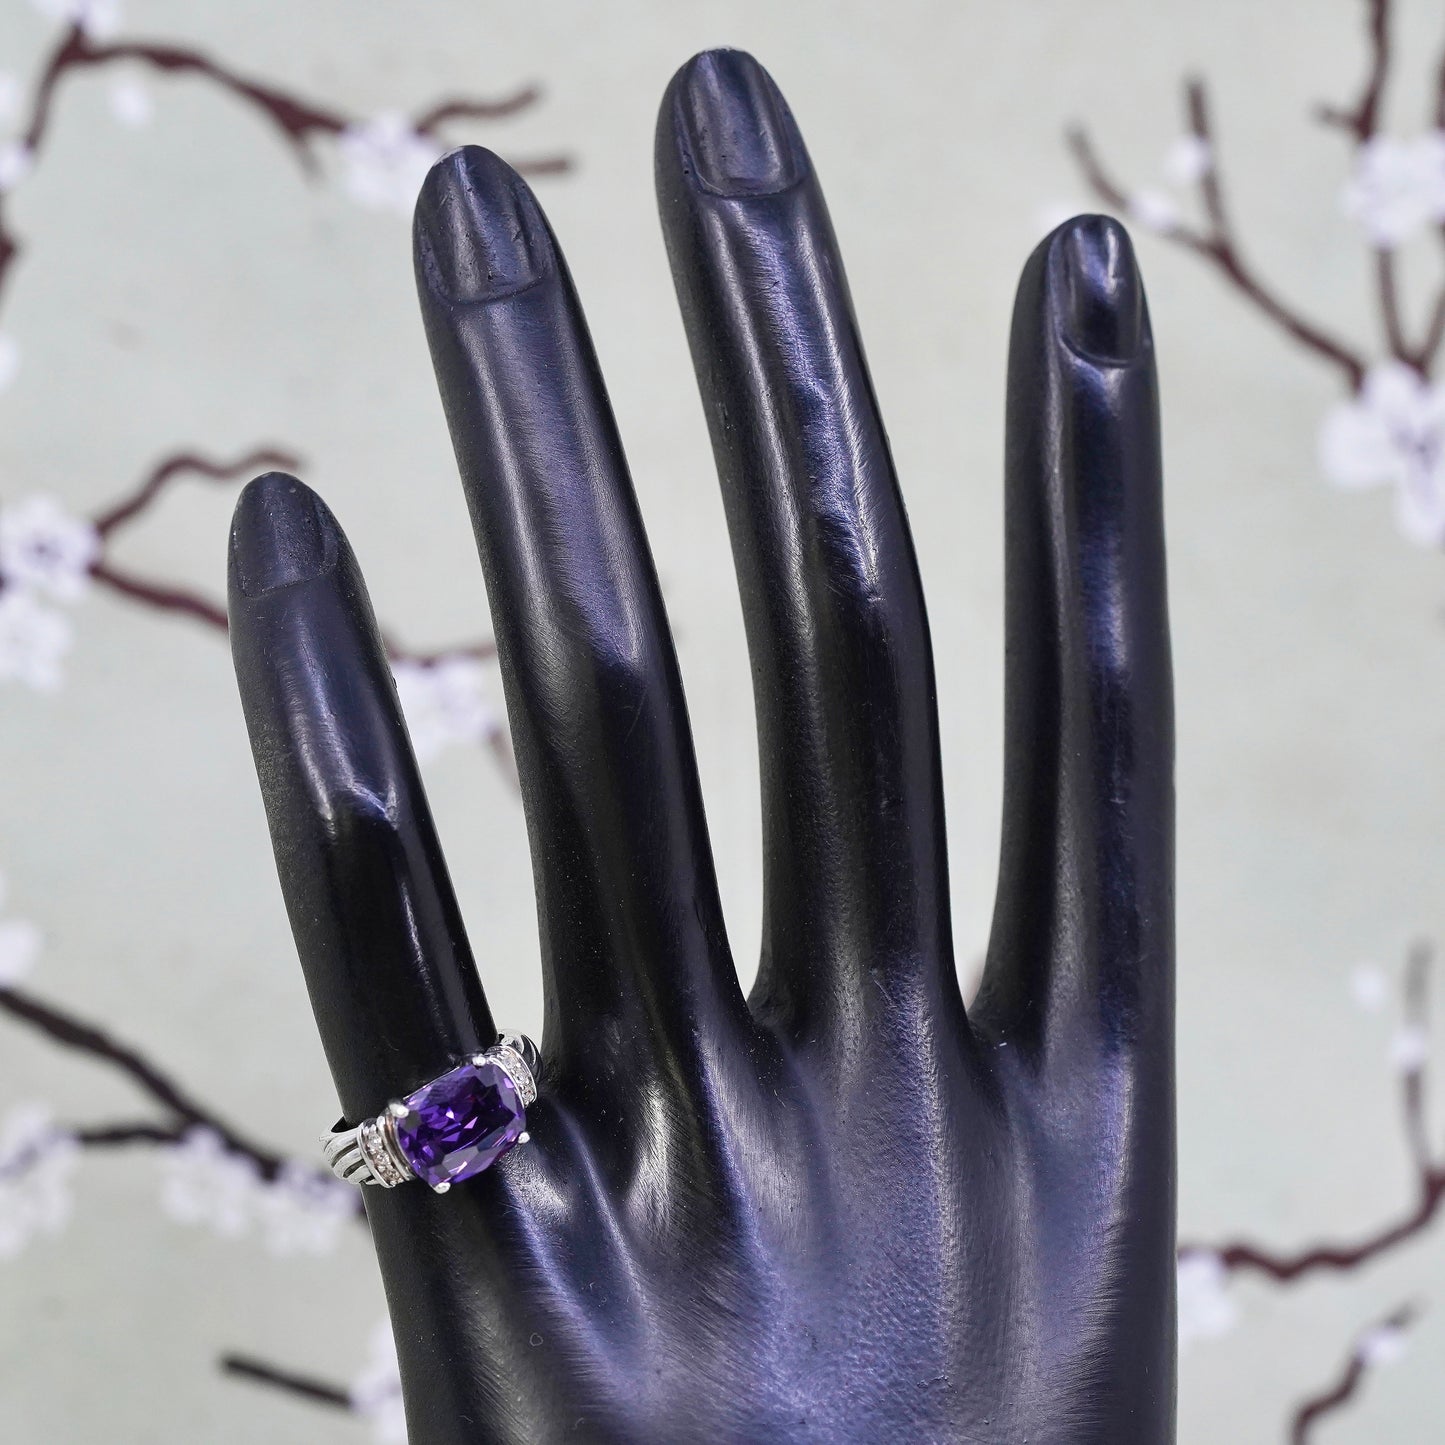 Size 5, vintage Sterling silver handmade ring, 925 with amethyst and Cz around